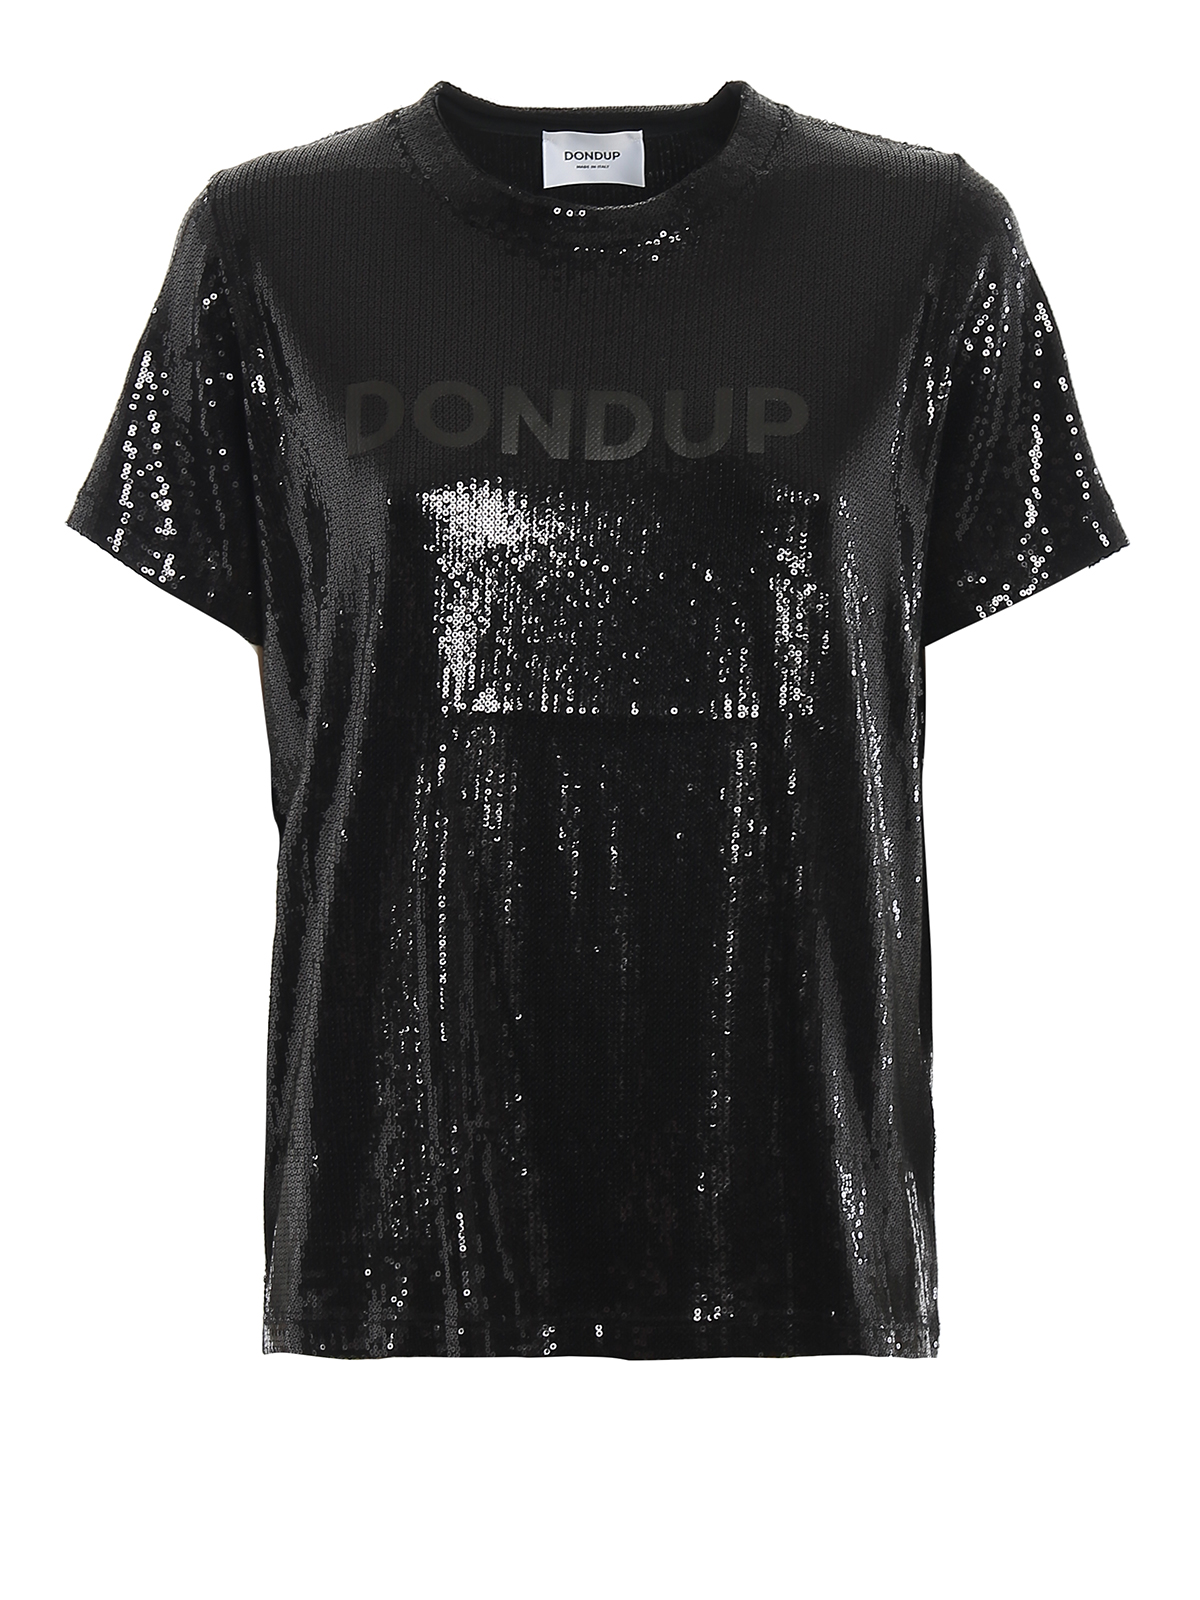 DONDUP BLACK SEQUINED T-SHIRT